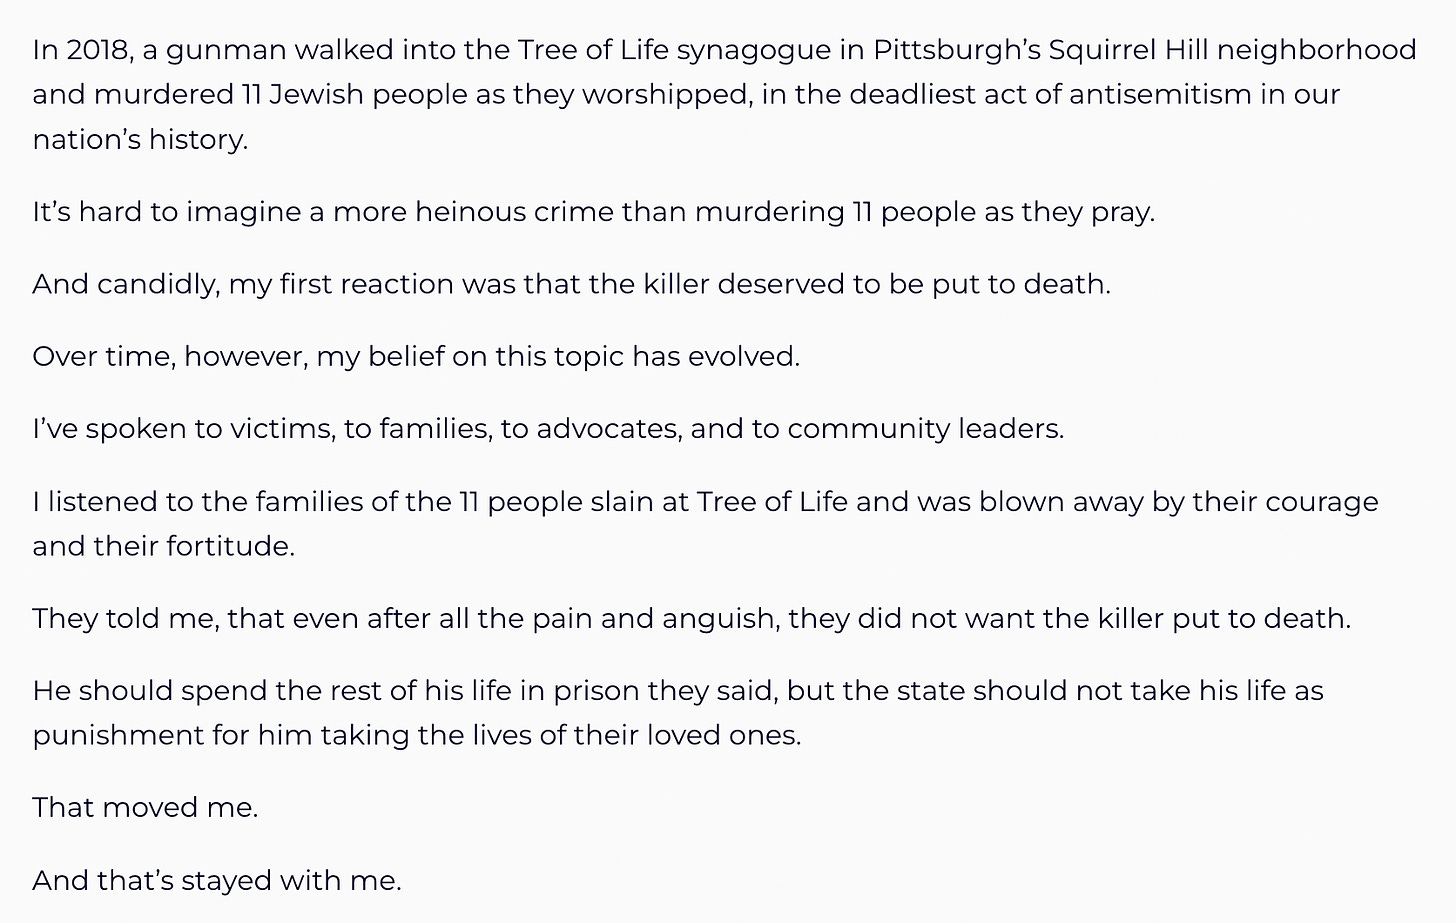 In 2018, a gunman walked into the Tree of Life synagogue in Pittsburgh’s Squirrel Hill neighborhood and murdered 11 Jewish people as they worshipped, in the deadliest act of antisemitism in our nation’s history.   It’s hard to imagine a more heinous crime than murdering 11 people as they pray.    And candidly, my first reaction was that the killer deserved to be put to death.   Over time, however, my belief on this topic has evolved.   I’ve spoken to victims, to families, to advocates, and to community leaders.   I listened to the families of the 11 people slain at Tree of Life and was blown away by their courage and their fortitude.    They told me, that even after all the pain and anguish, they did not want the killer put to death.     He should spend the rest of his life in prison they said, but the state should not take his life as punishment for him taking the lives of their loved ones.   That moved me.    And that’s stayed with me.  